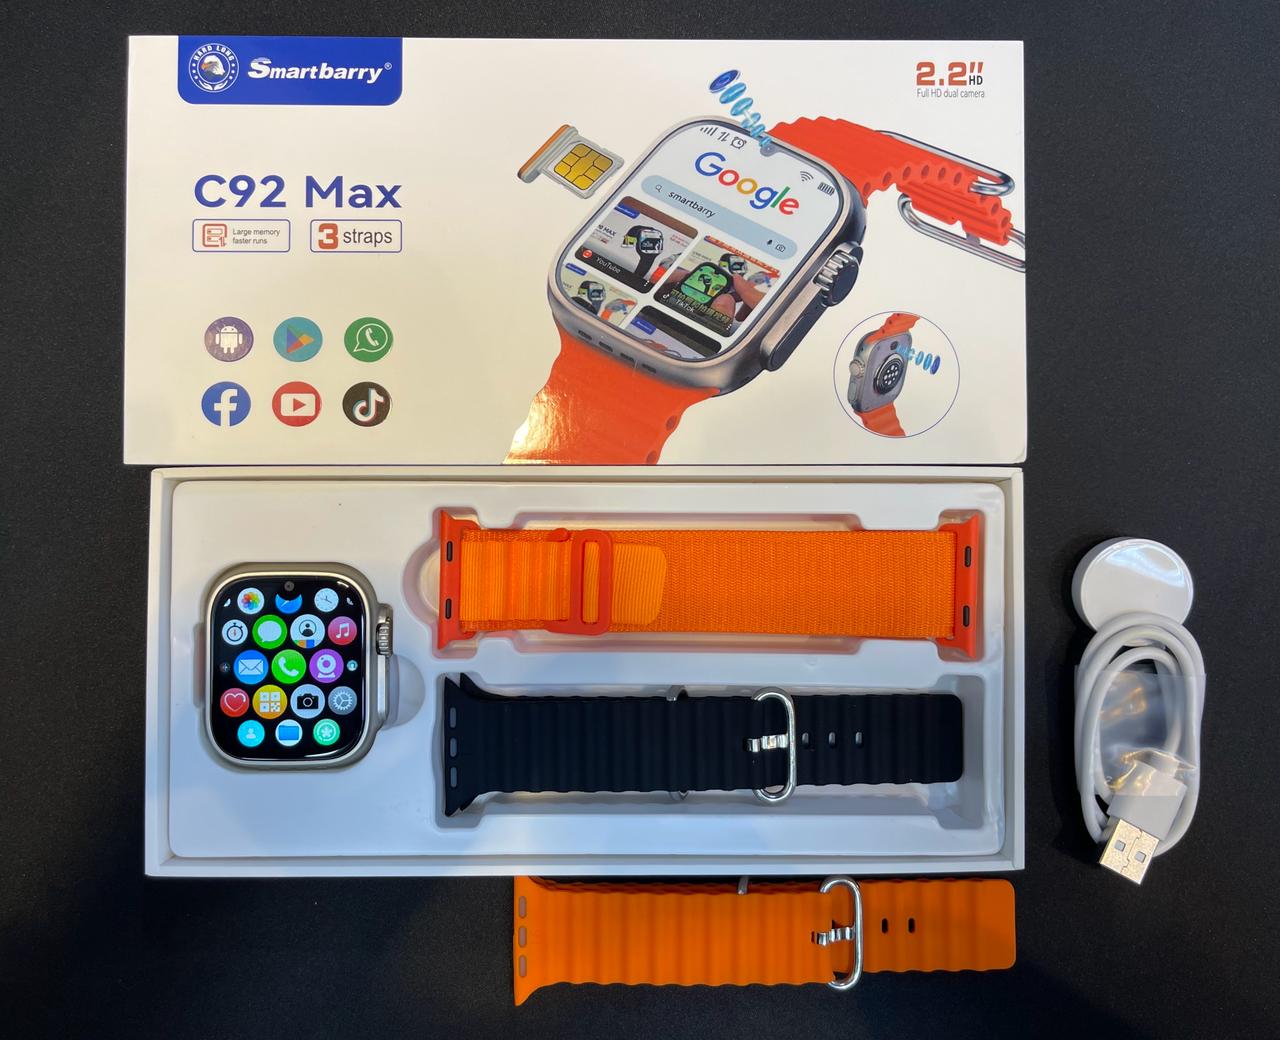 C92 MAX Super Amoled Watch Dual Camera Front And Back 2.2 HD Display YouTube ,Facebook ,INSTAGRAM ,Tiktok, Playstore